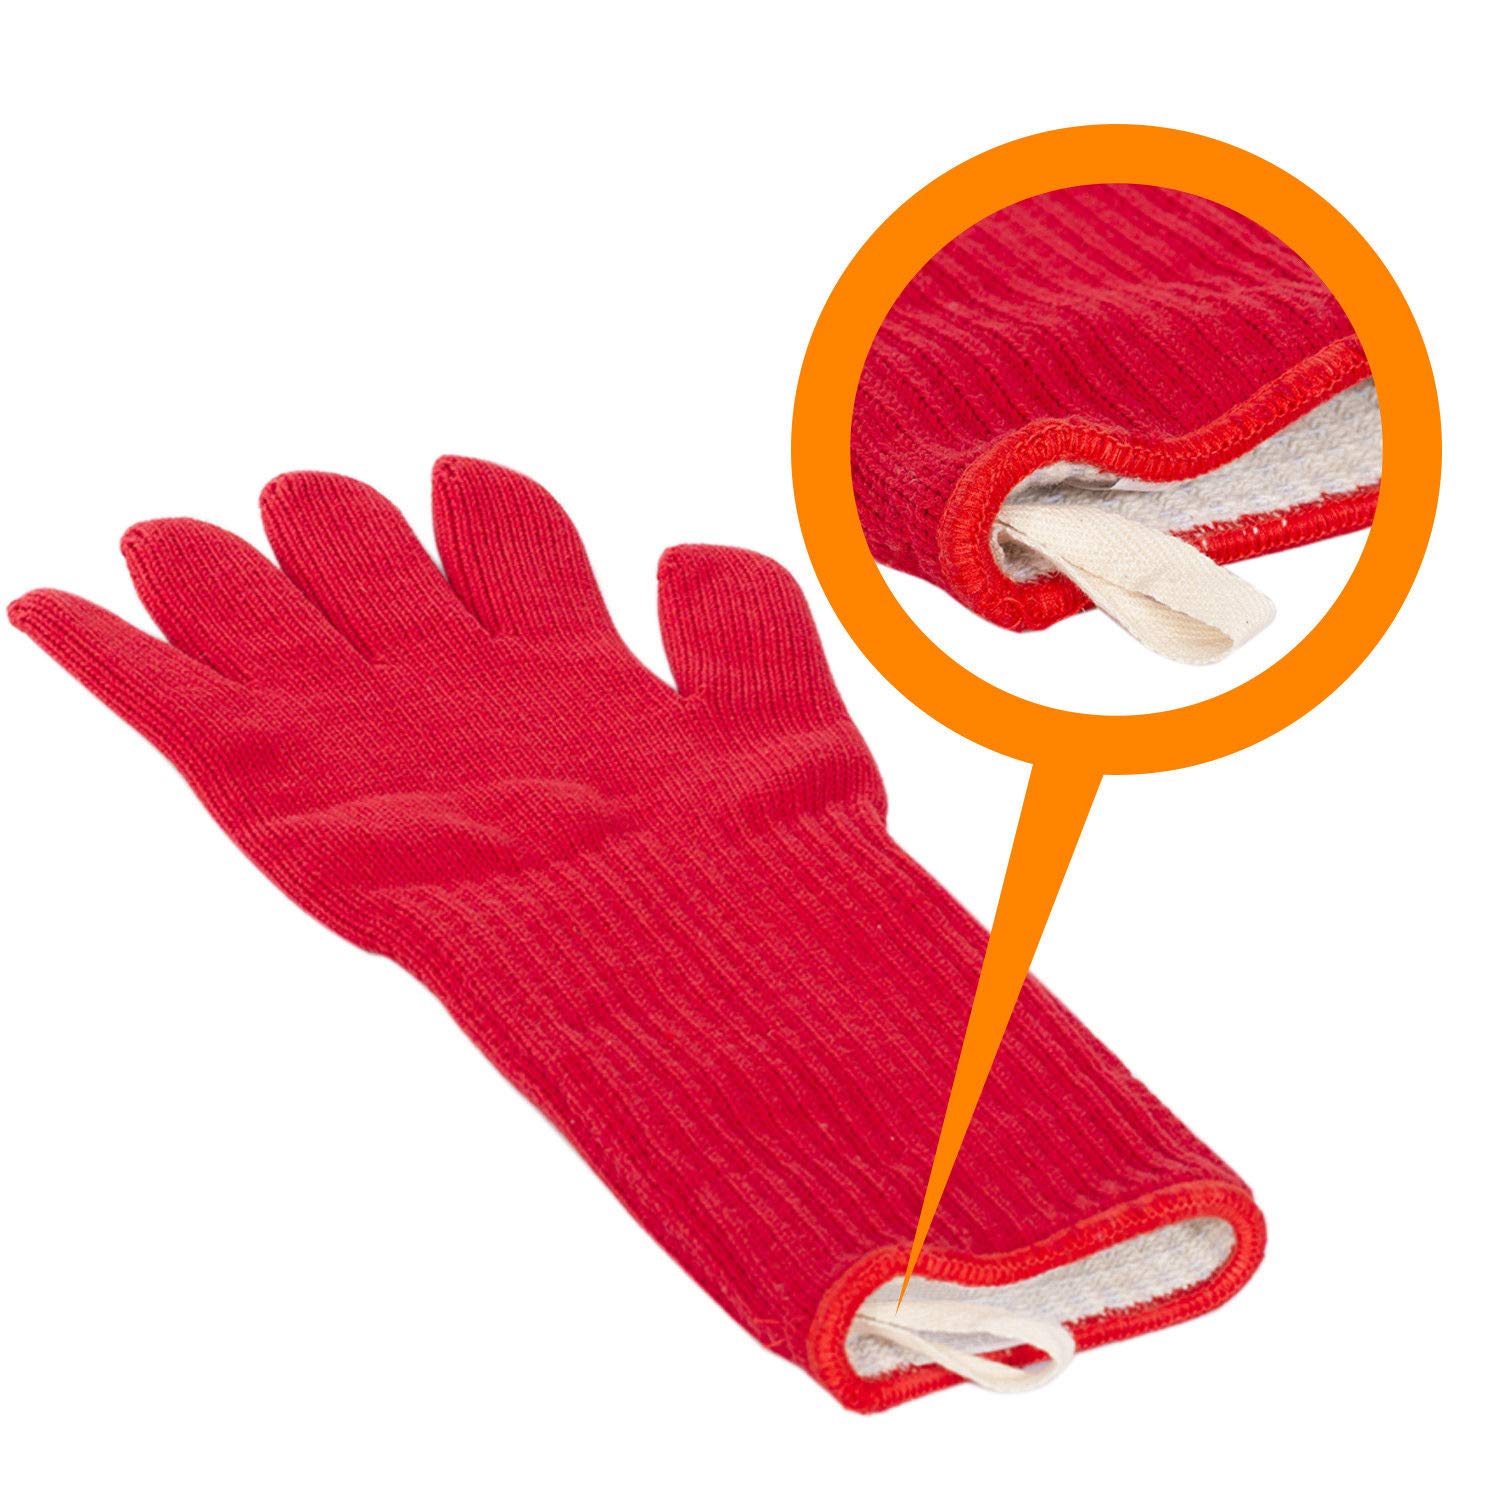 Super Oven Glove Extra Thick Extra Long Heat Resistant Oven Mitt Pot Holder Red